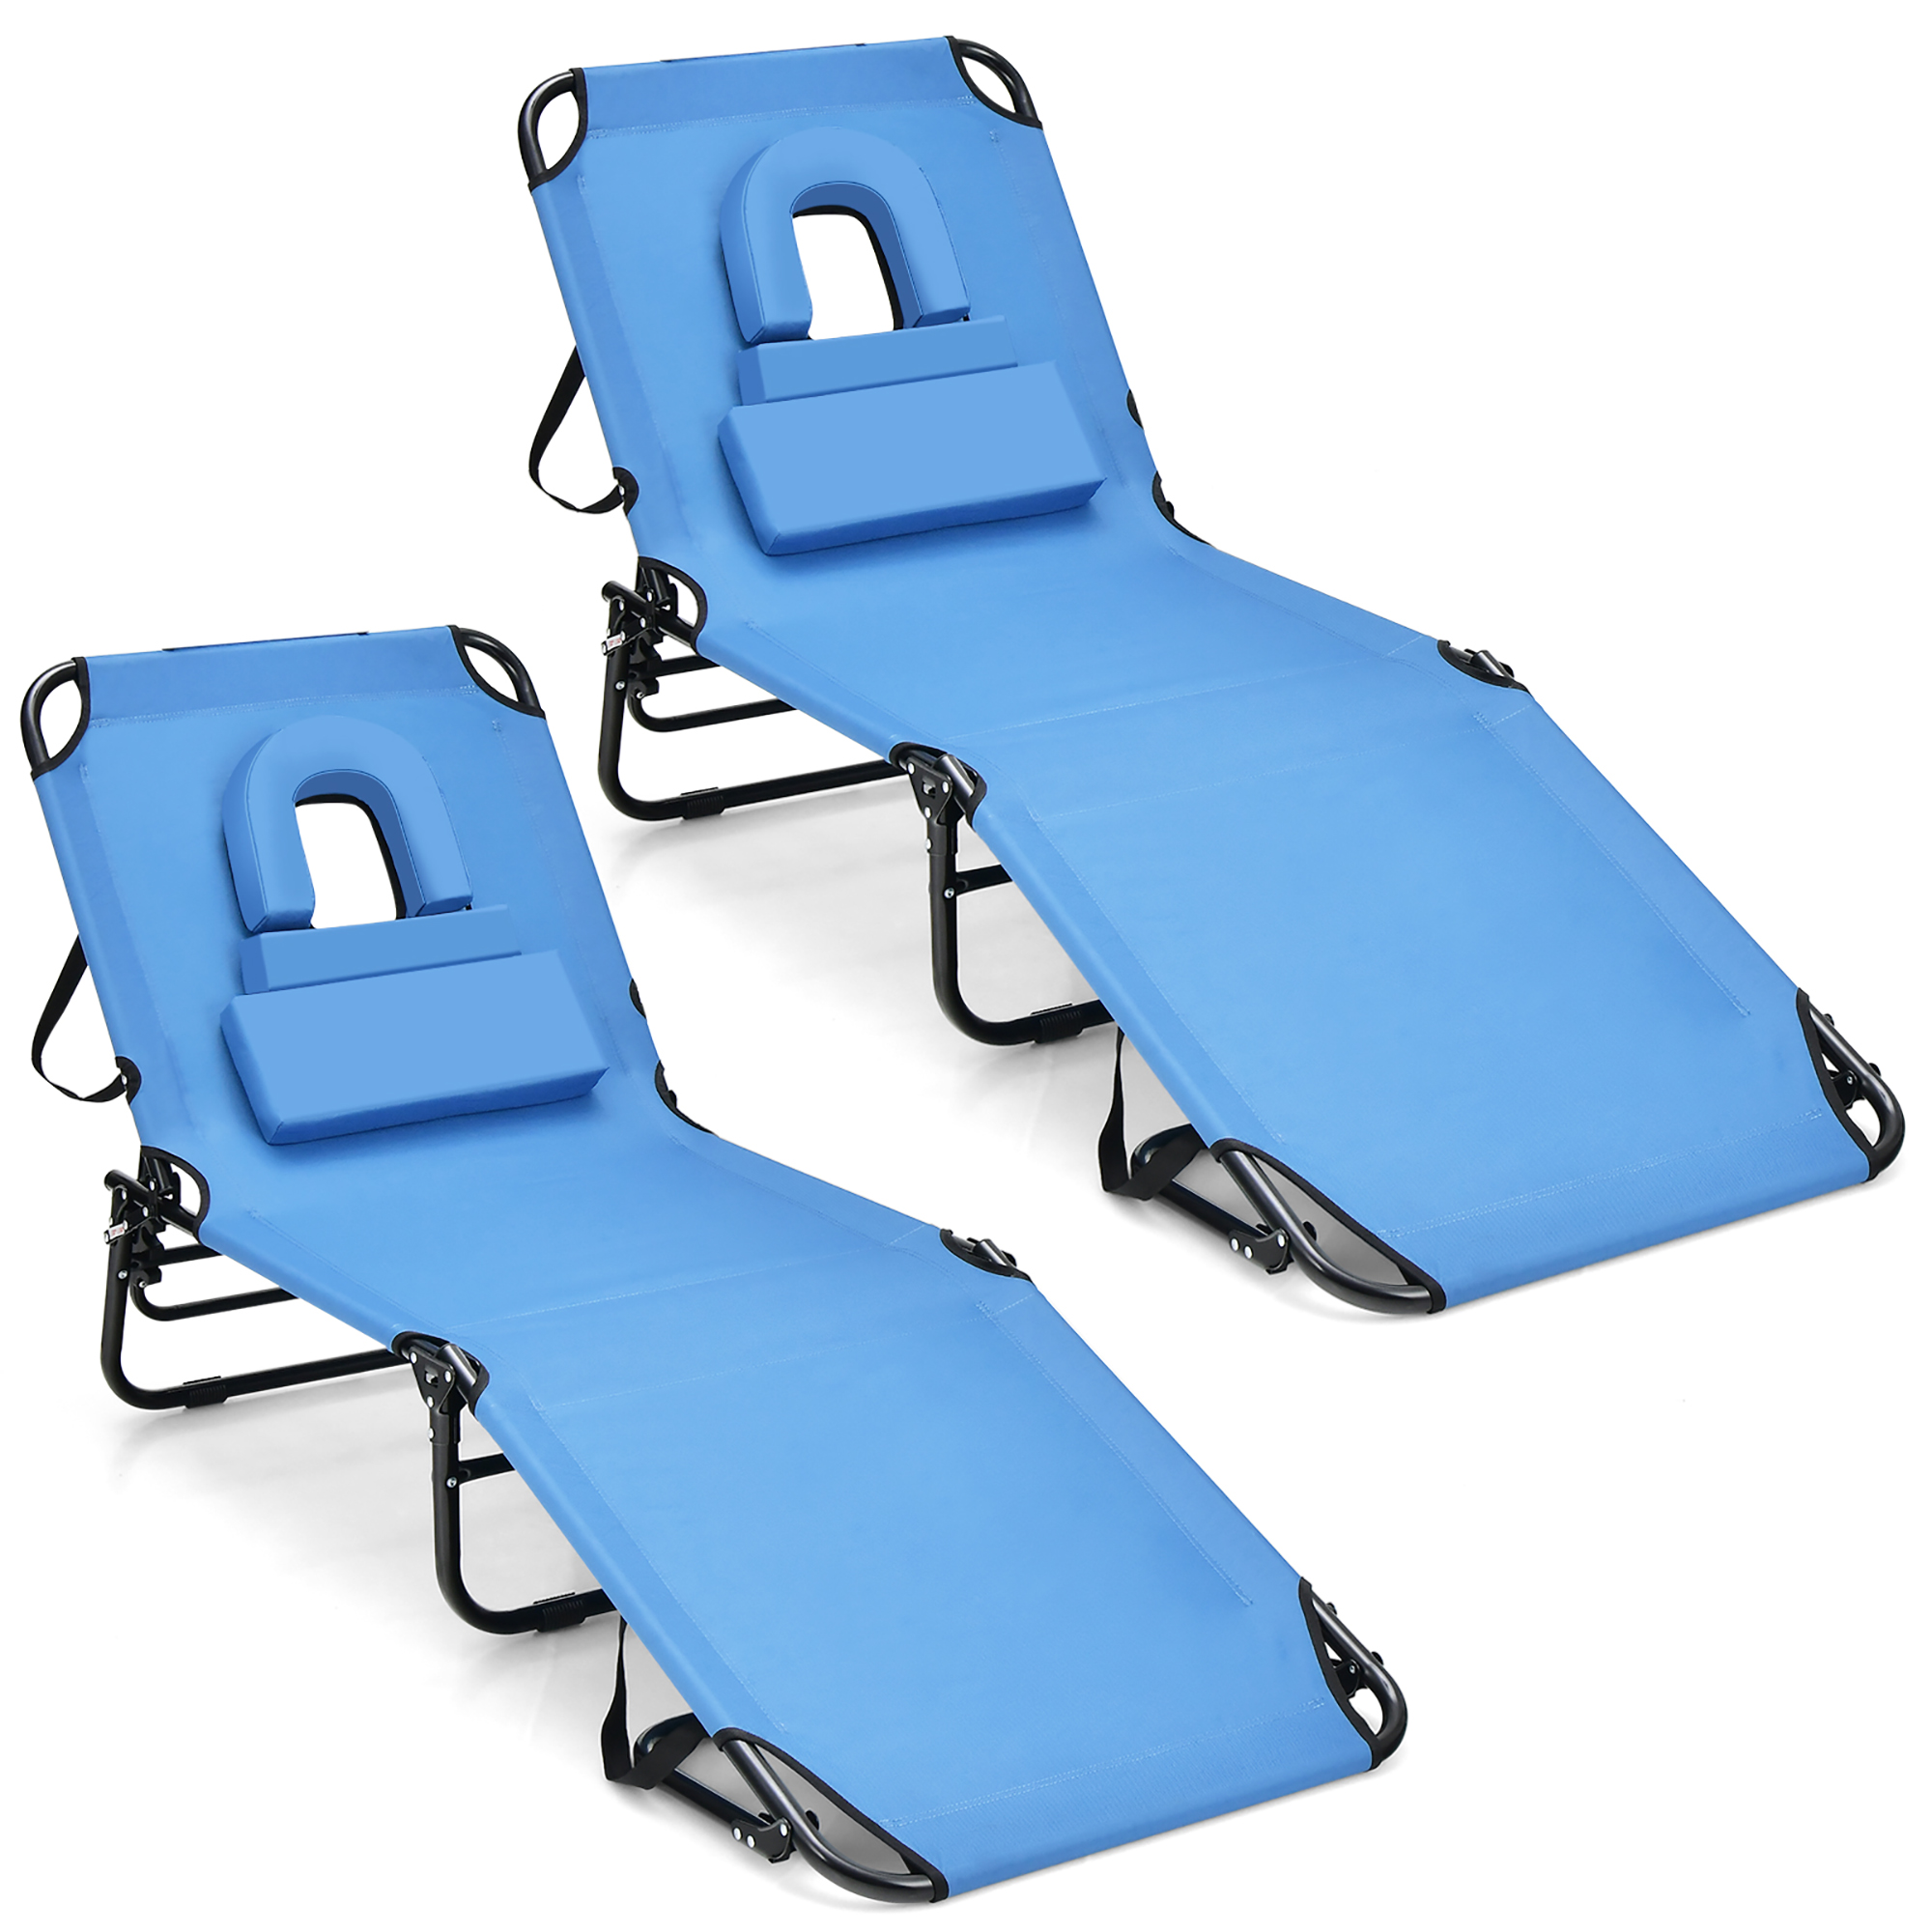 Costway 2 PCS Beach Chaise Lounge Chair with Face Hole Pillows & Adjustable Backrest Blue - image 5 of 10